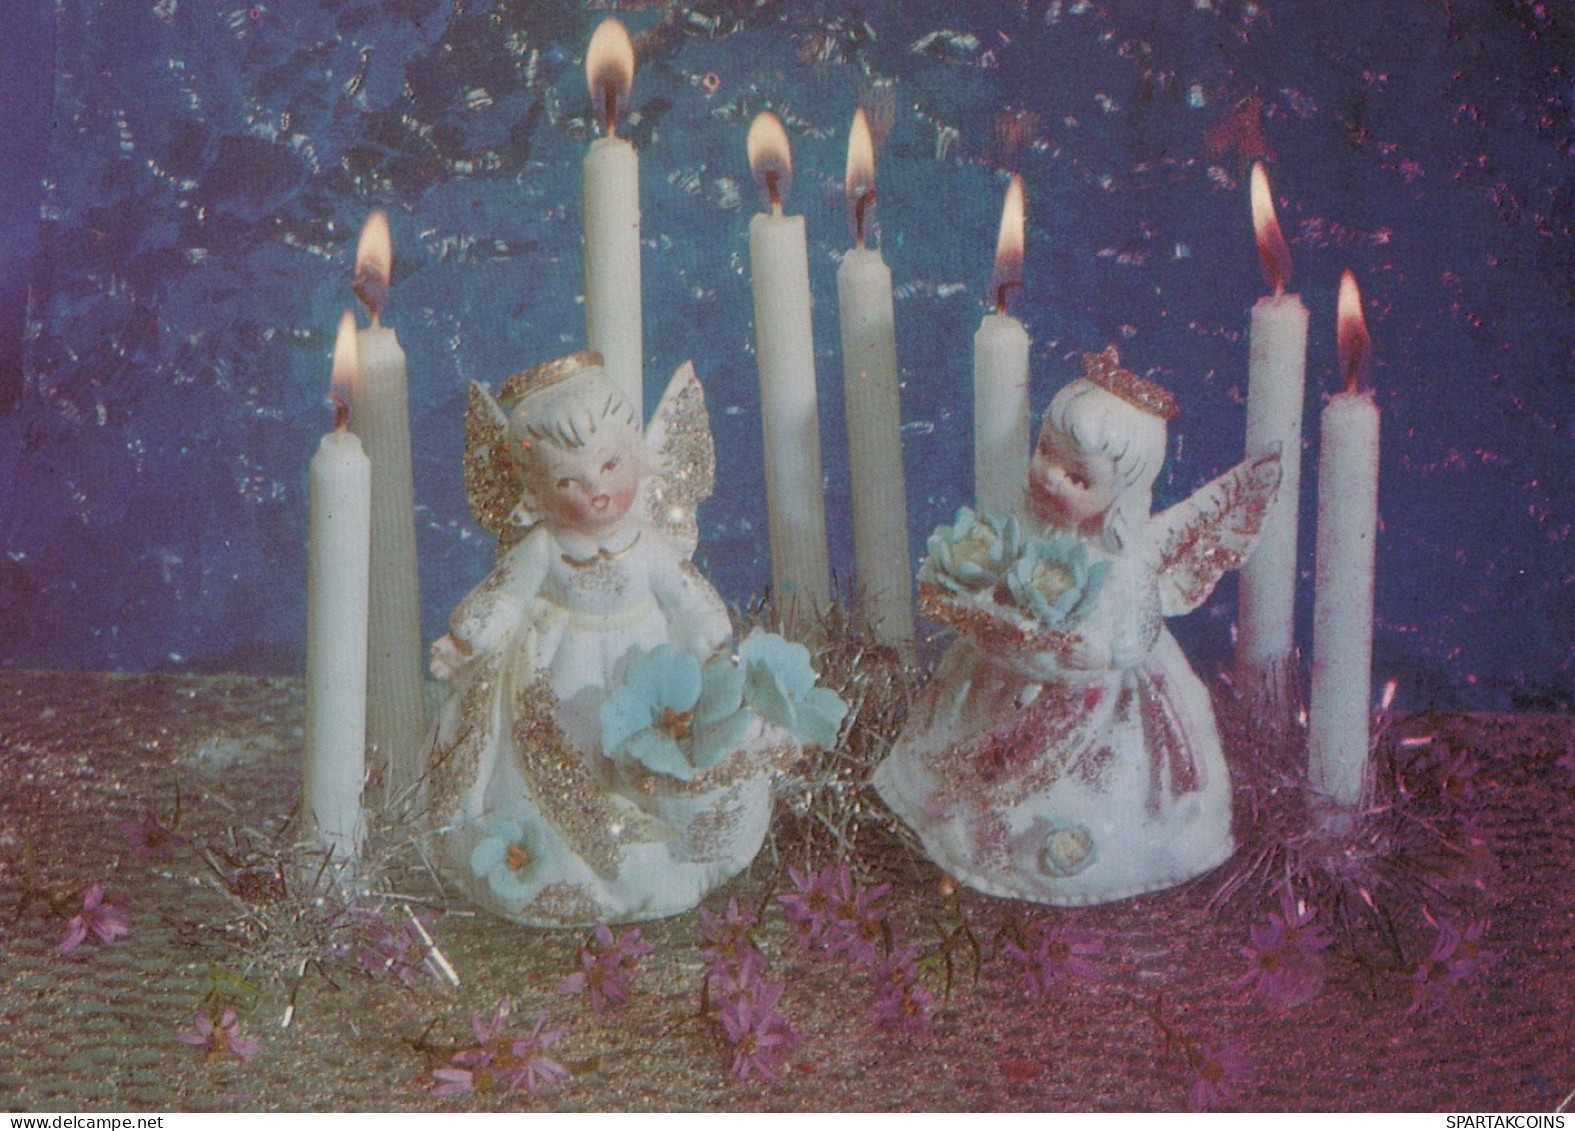 ANGELO Buon Anno Natale Vintage Cartolina CPSM #PAH016.A - Angels